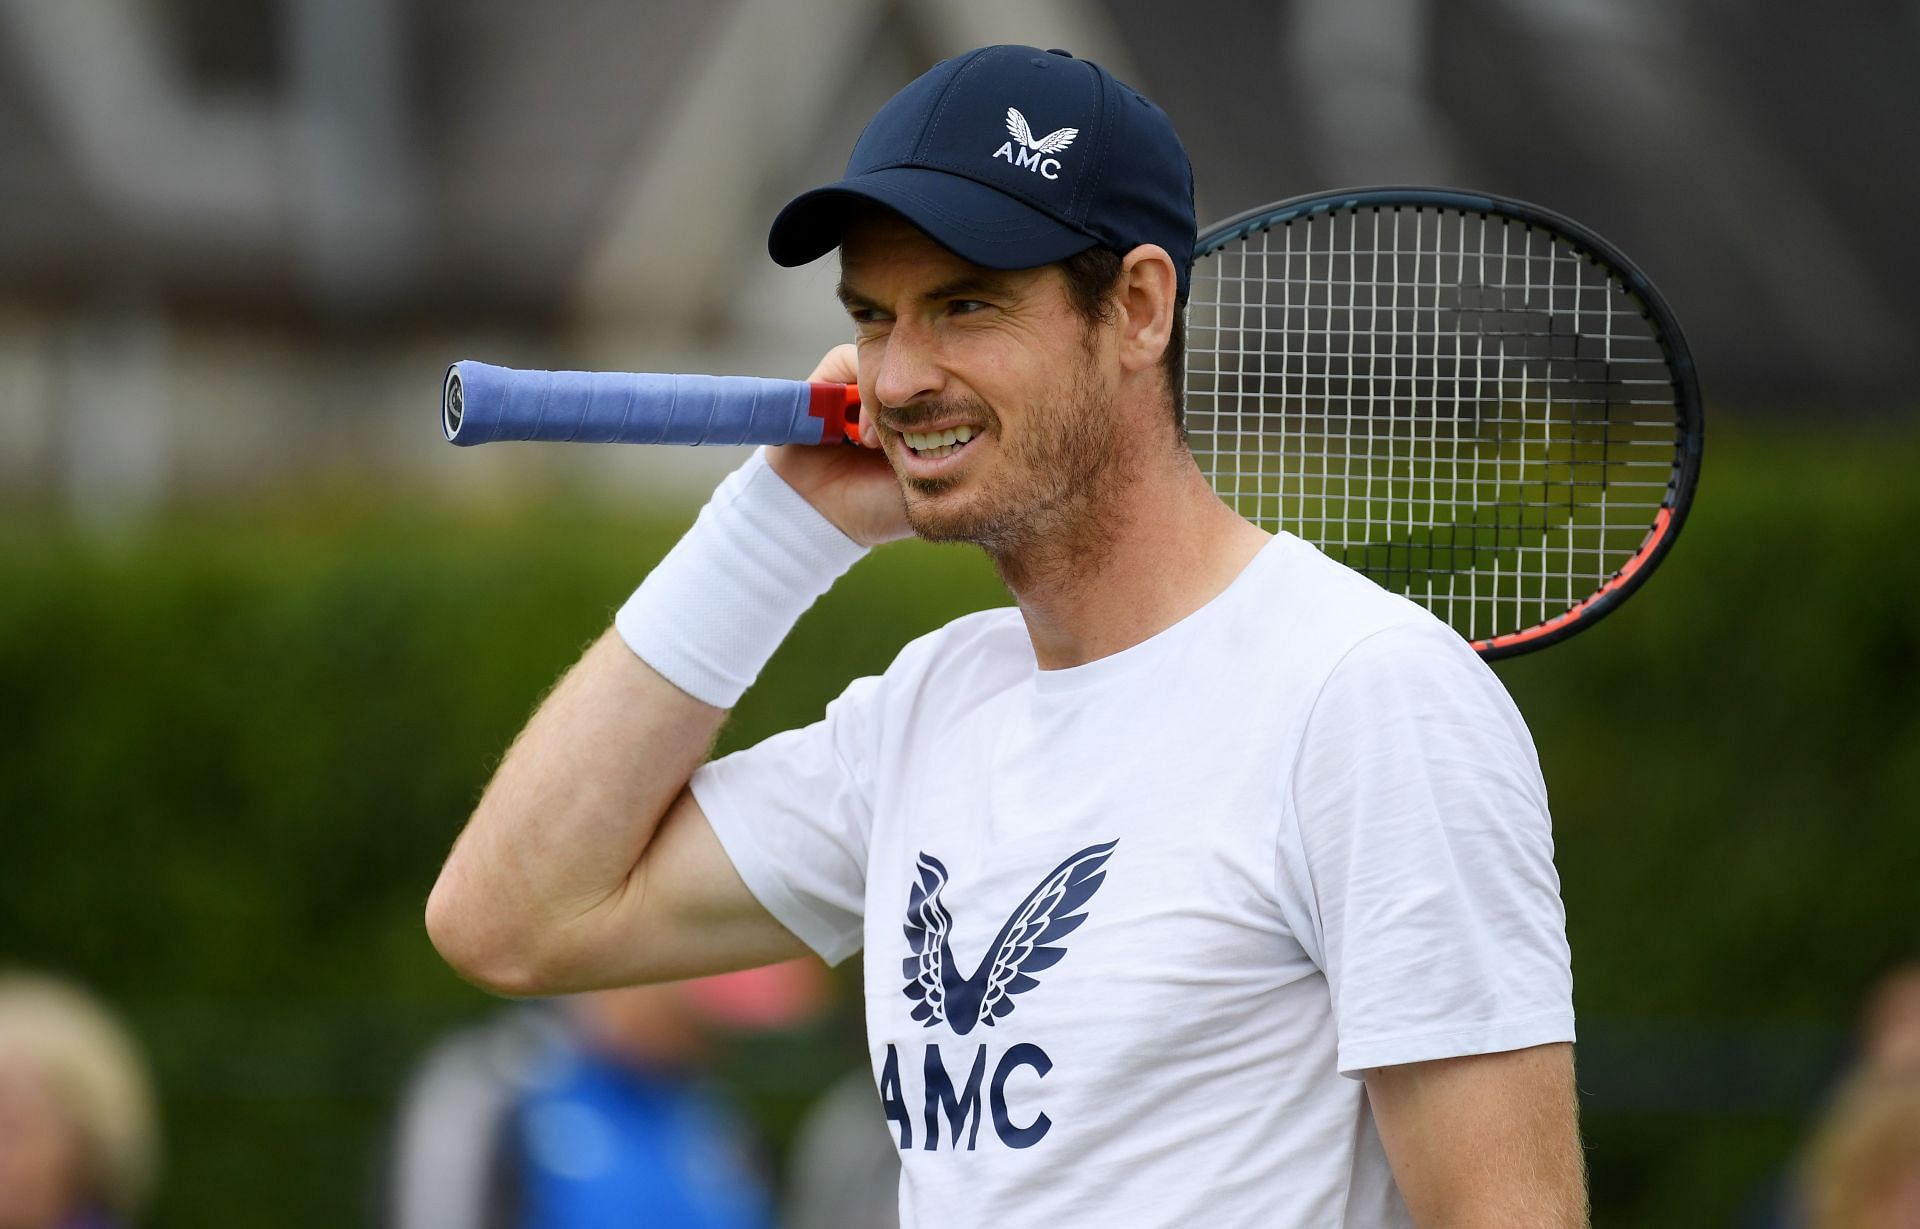 Andy Murray returns to the Hall of Fame Open for the first time since 2006.